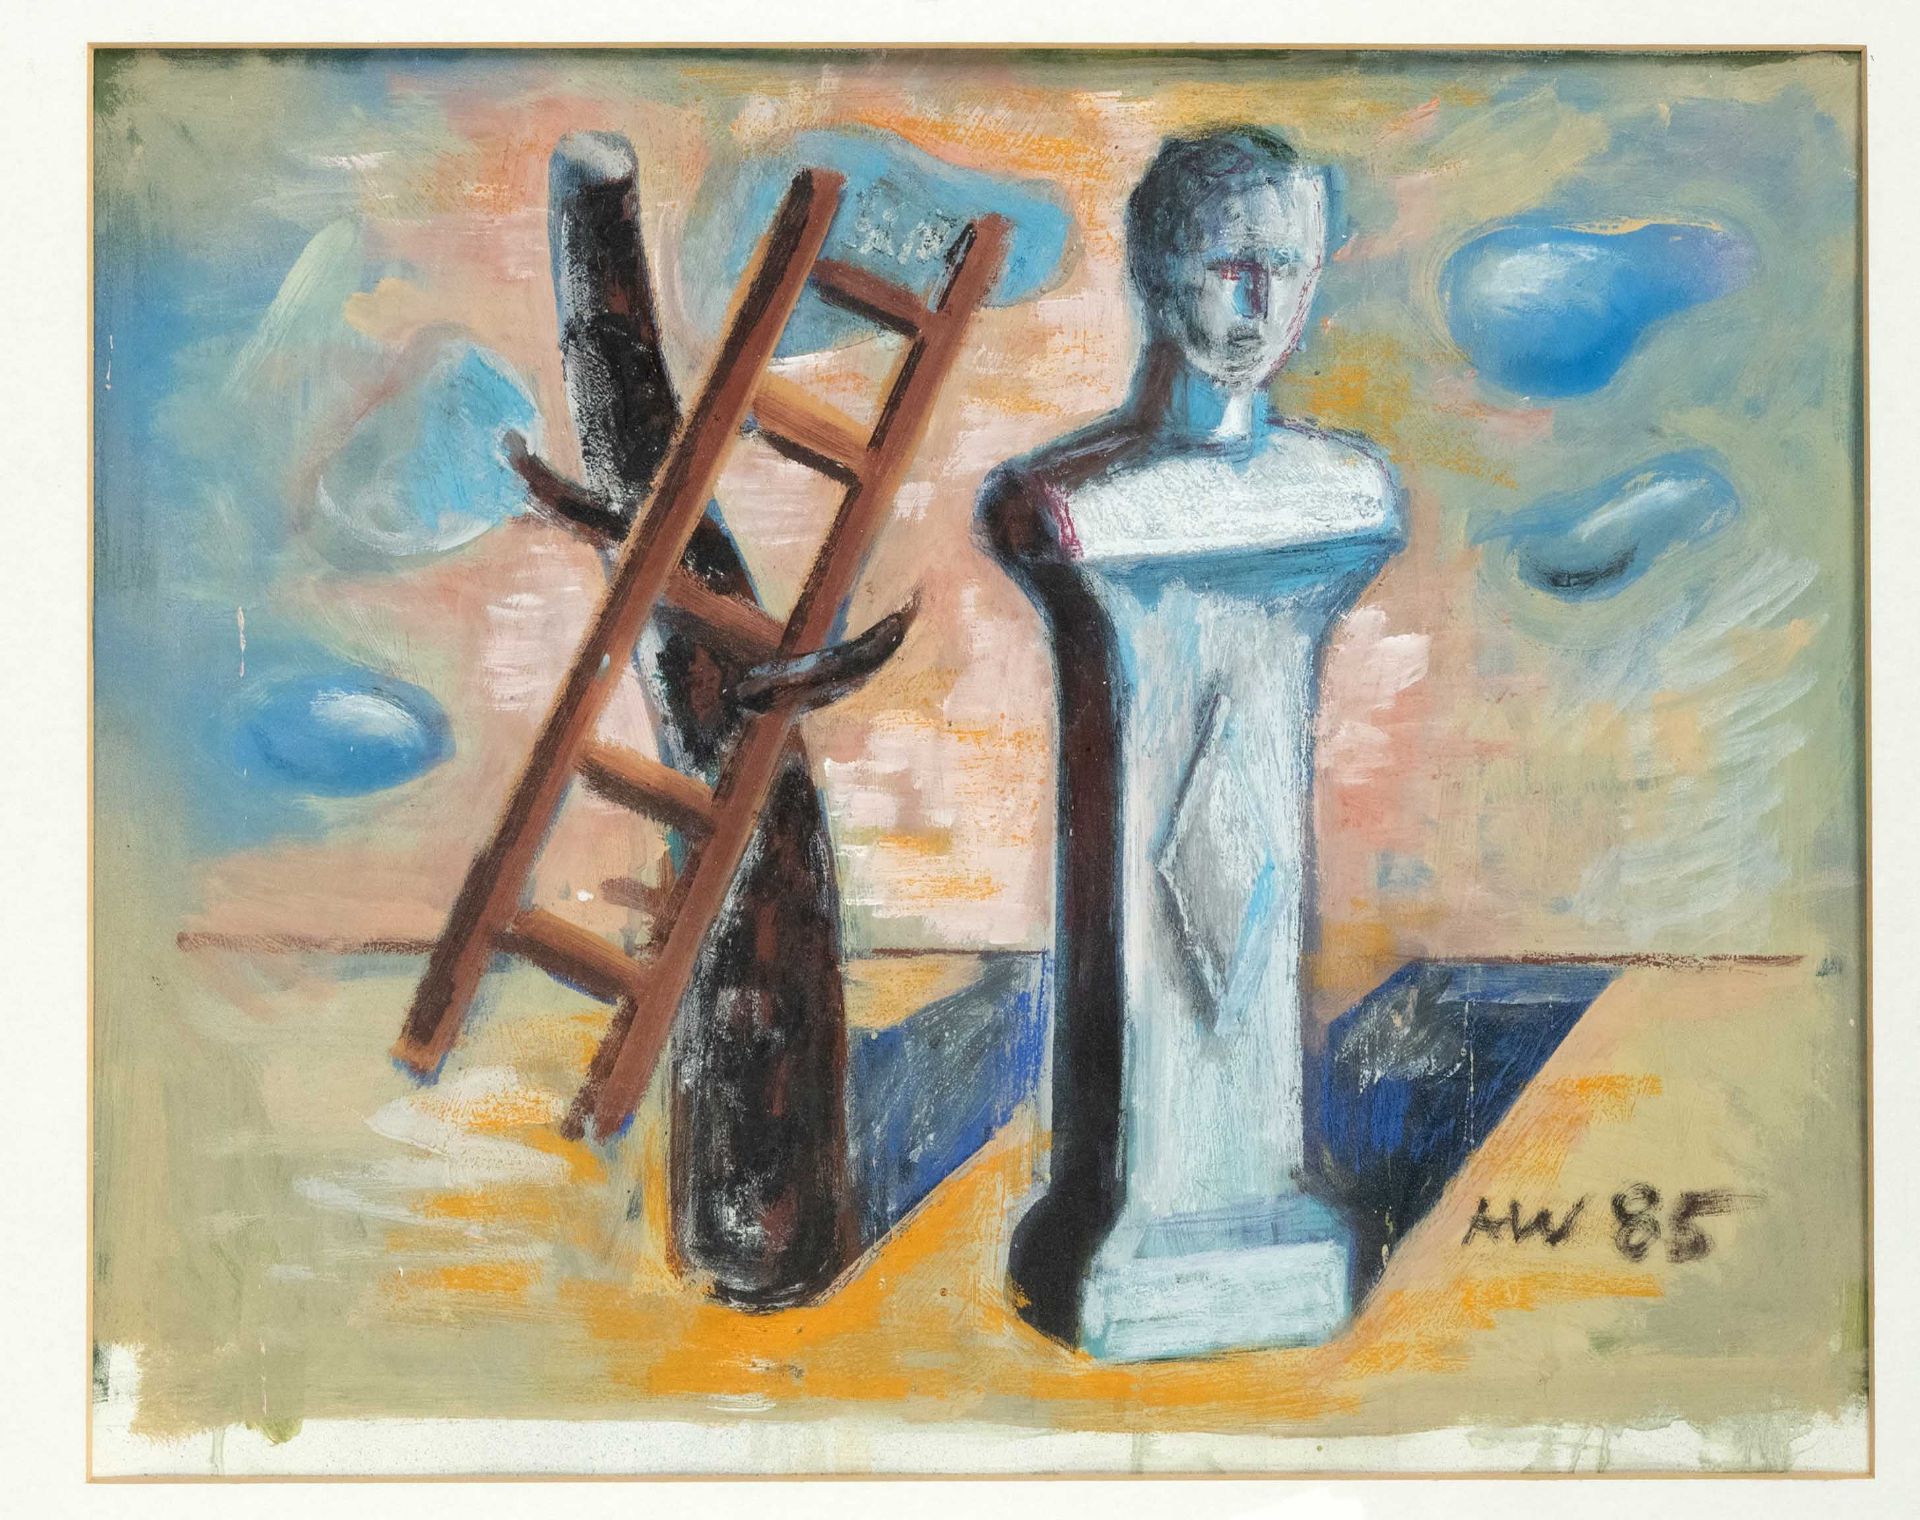 Andreas Weishaupt (*1957), surreal still life with bust and ladder, mixed media on paper,